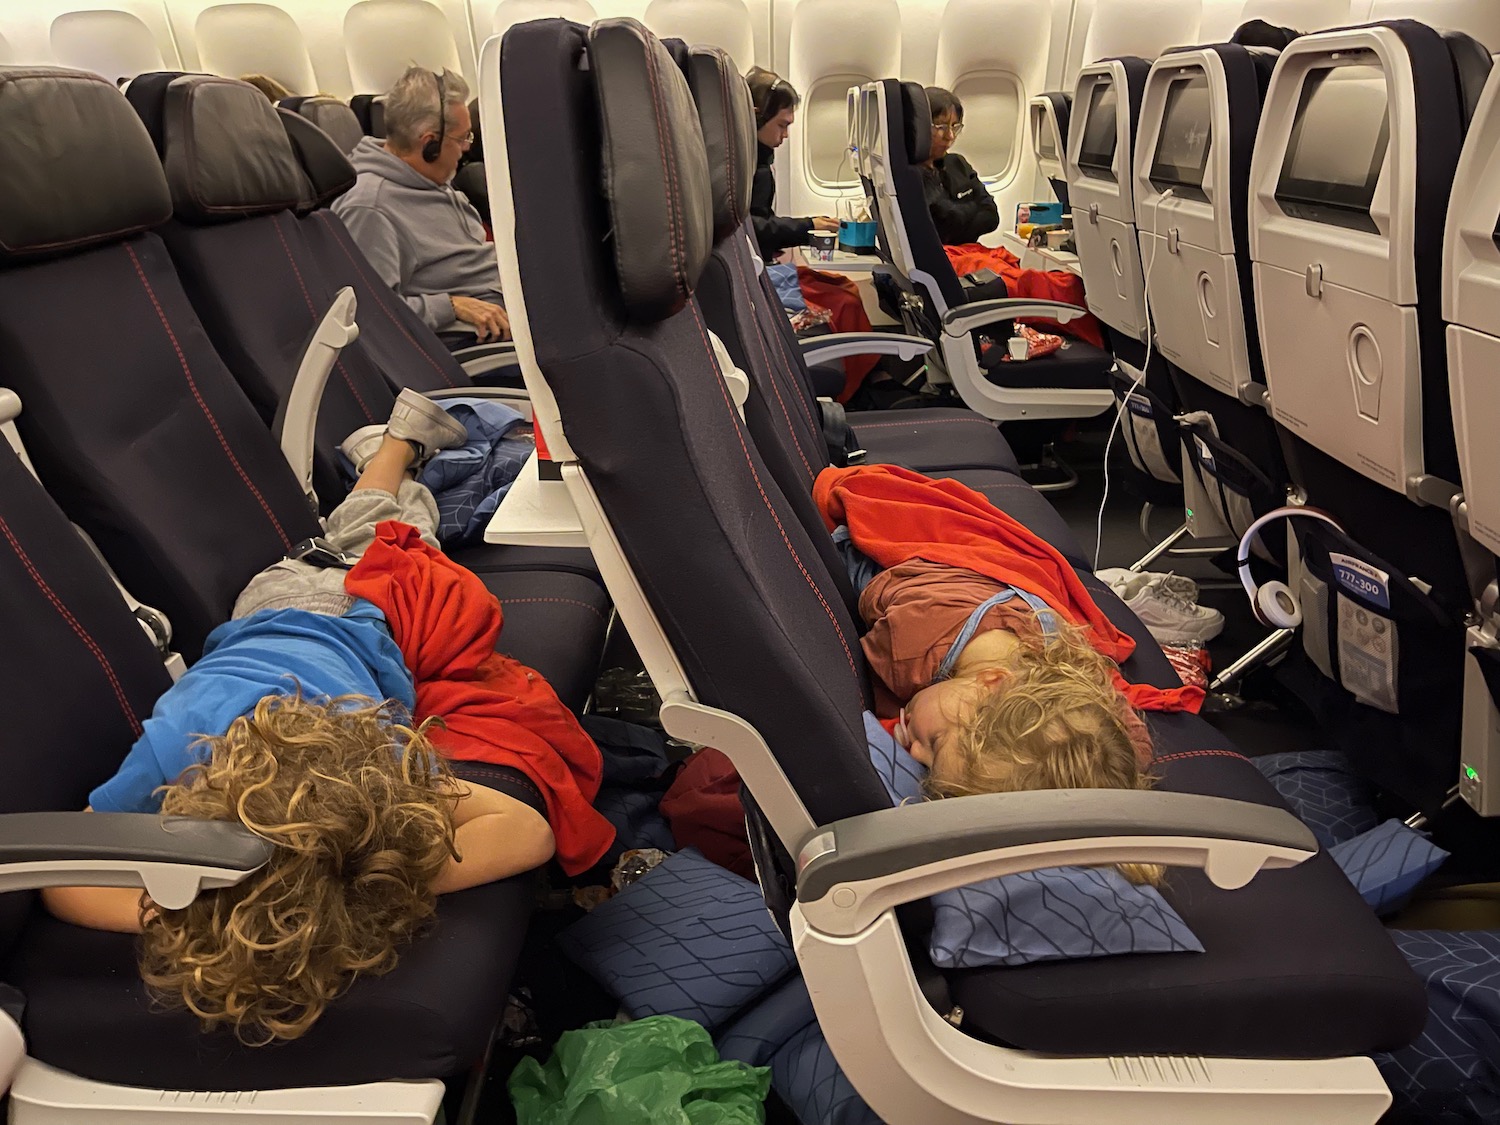 a group of people sleeping on seats in an airplane